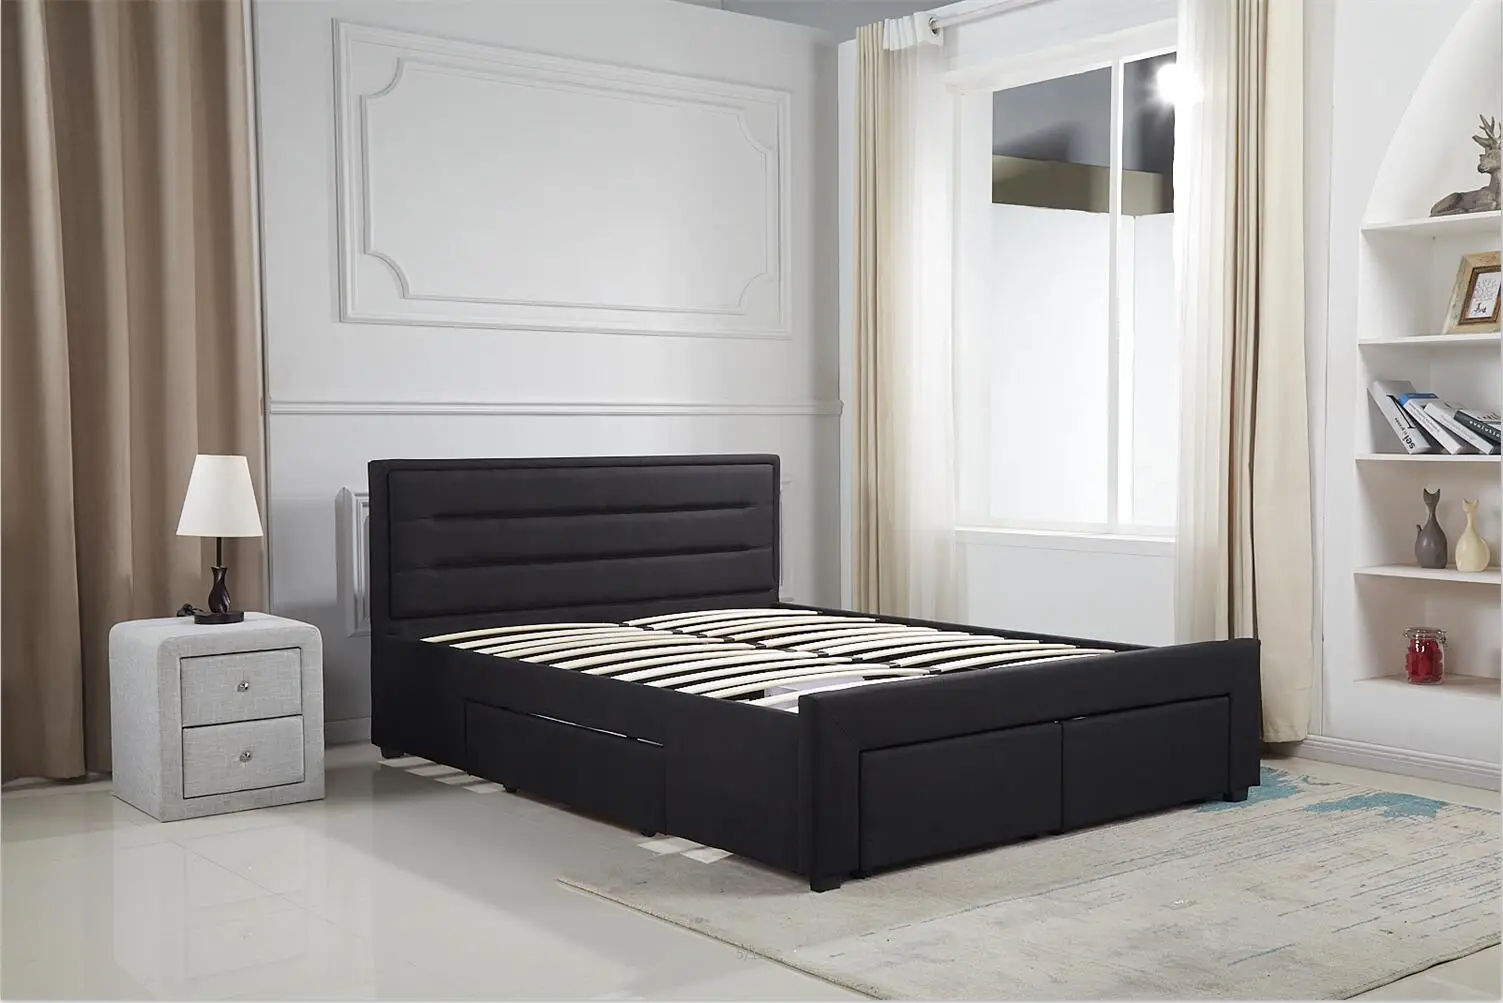 Royal PVC  leather bed